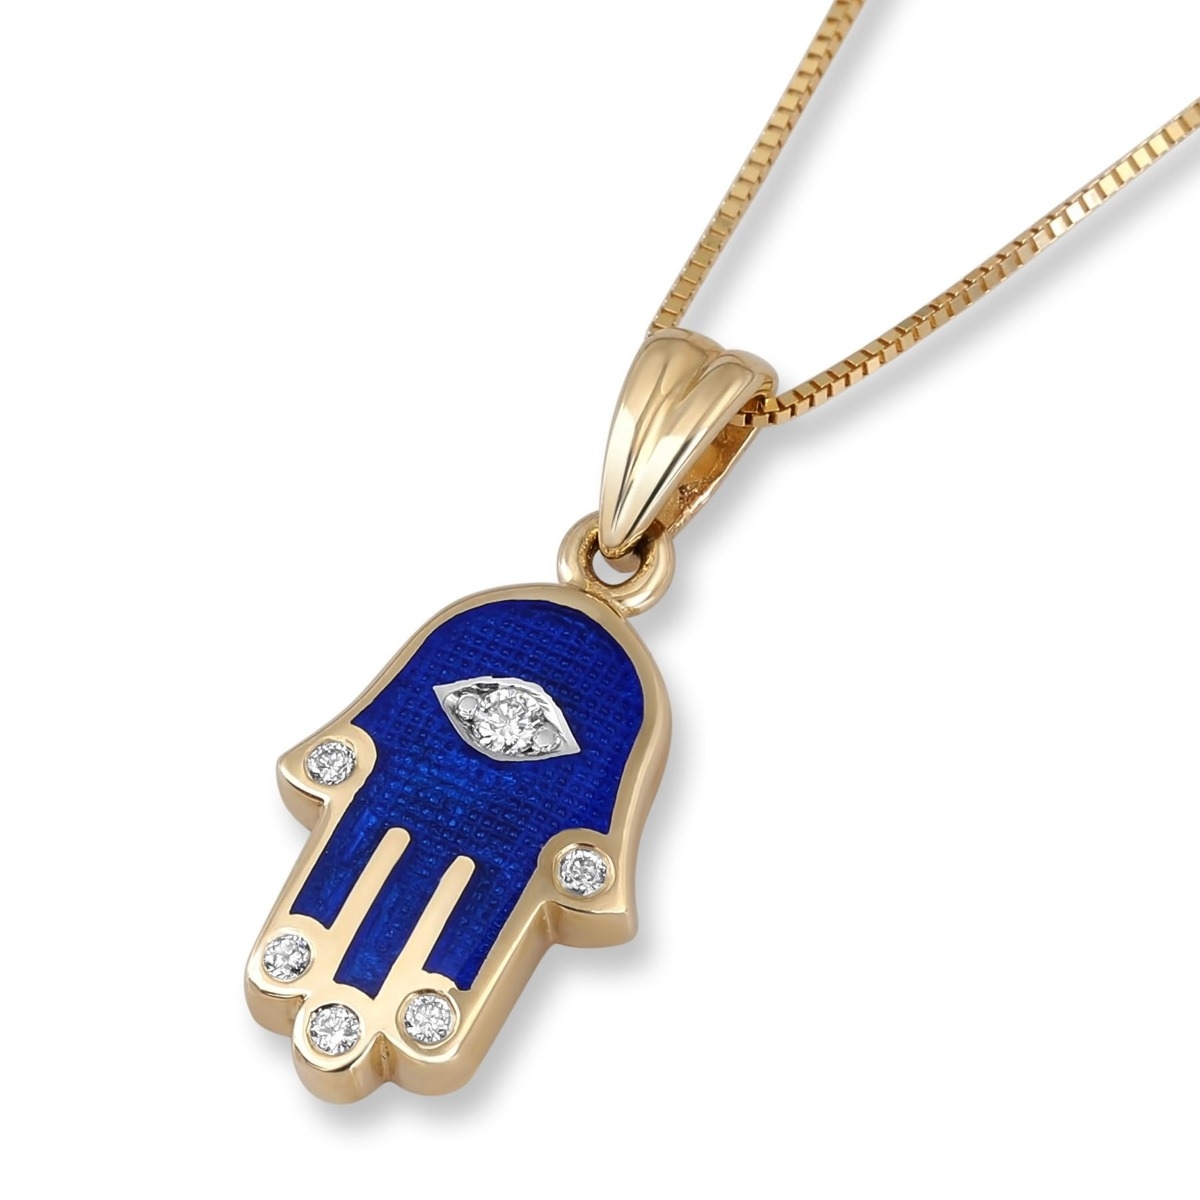 14K Gold and Blue Enamel Hamsa Pendant Necklace with Diamond Fingers and  Evil Eye, Jewish Jewelry | Judaica WebStore